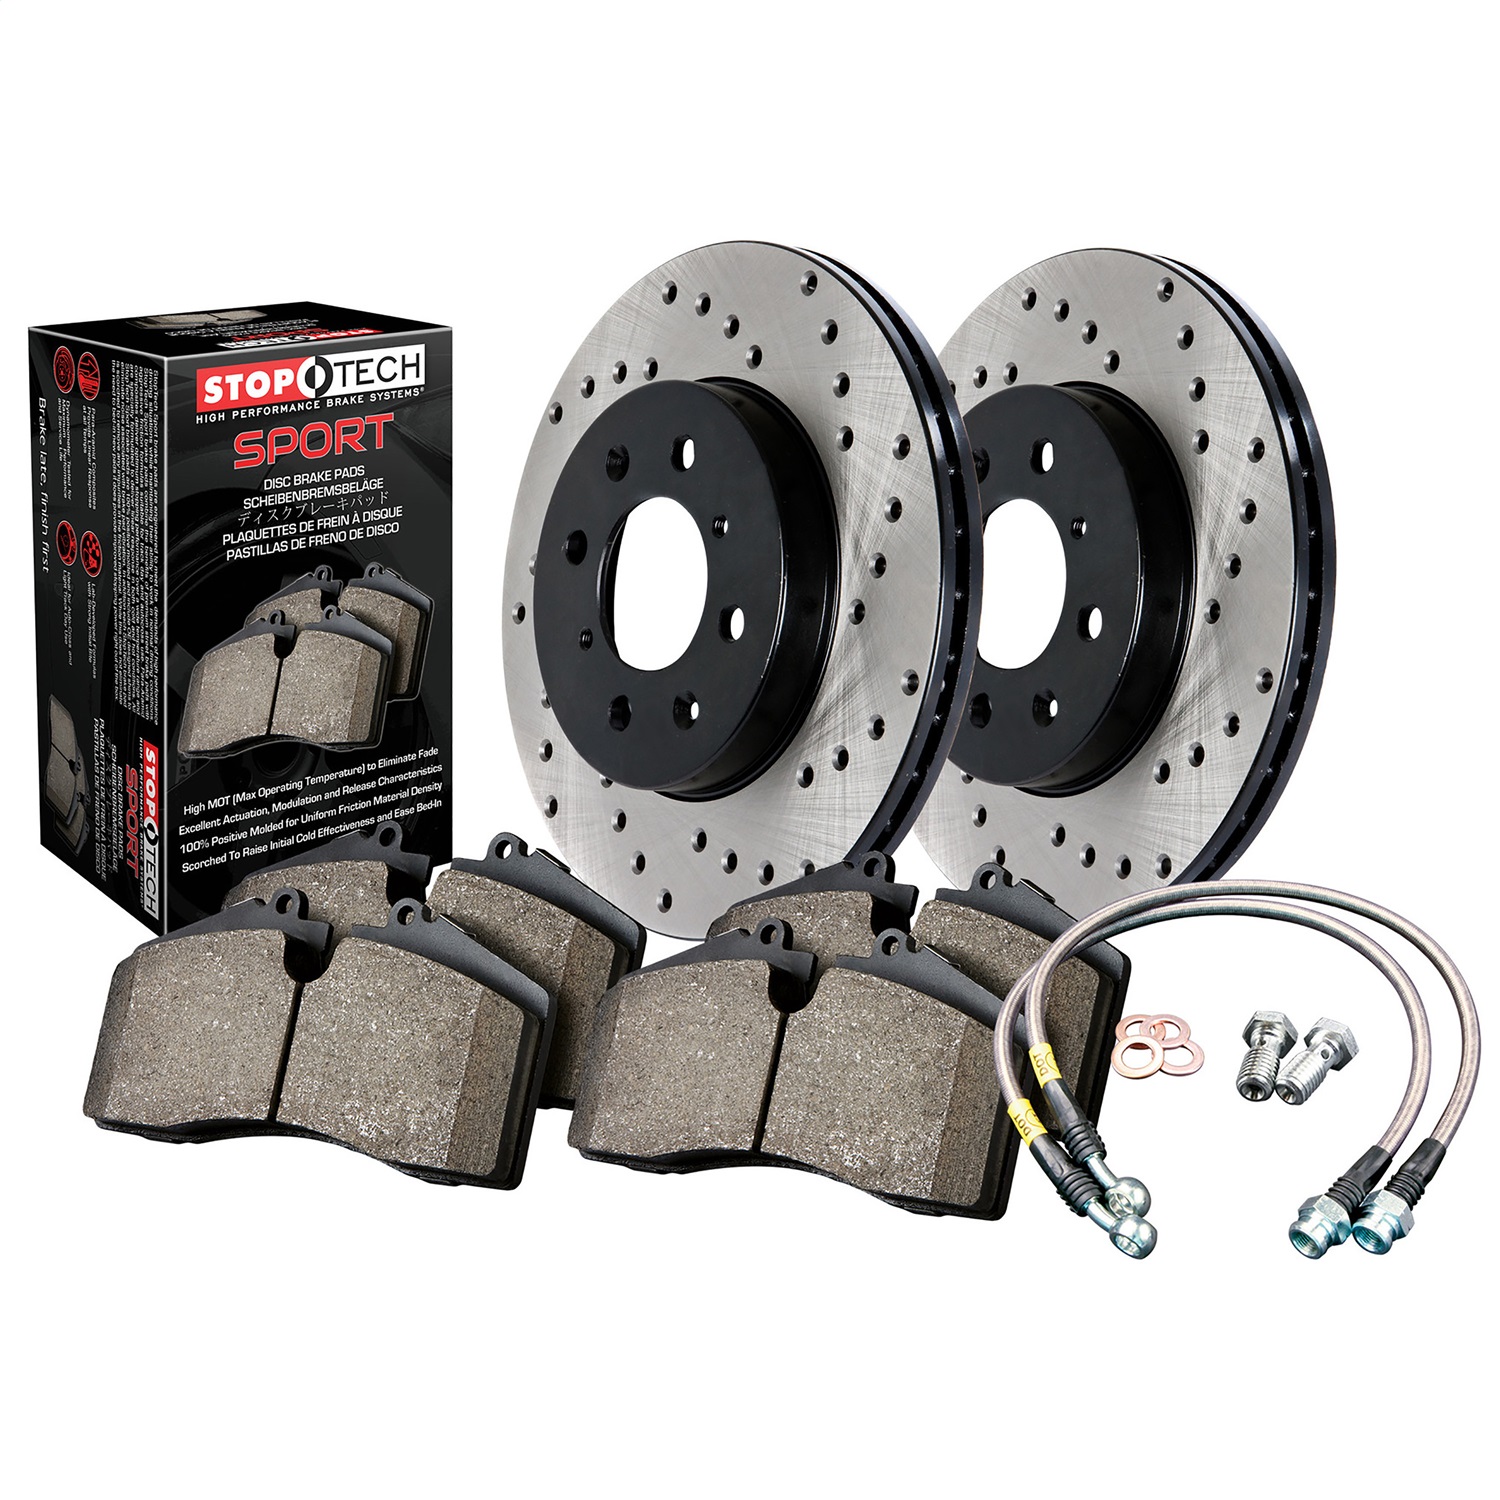 StopTech 979.61003R Sport Disc Brake Kit w/Cross-Drilled Rotors Fits Mustang